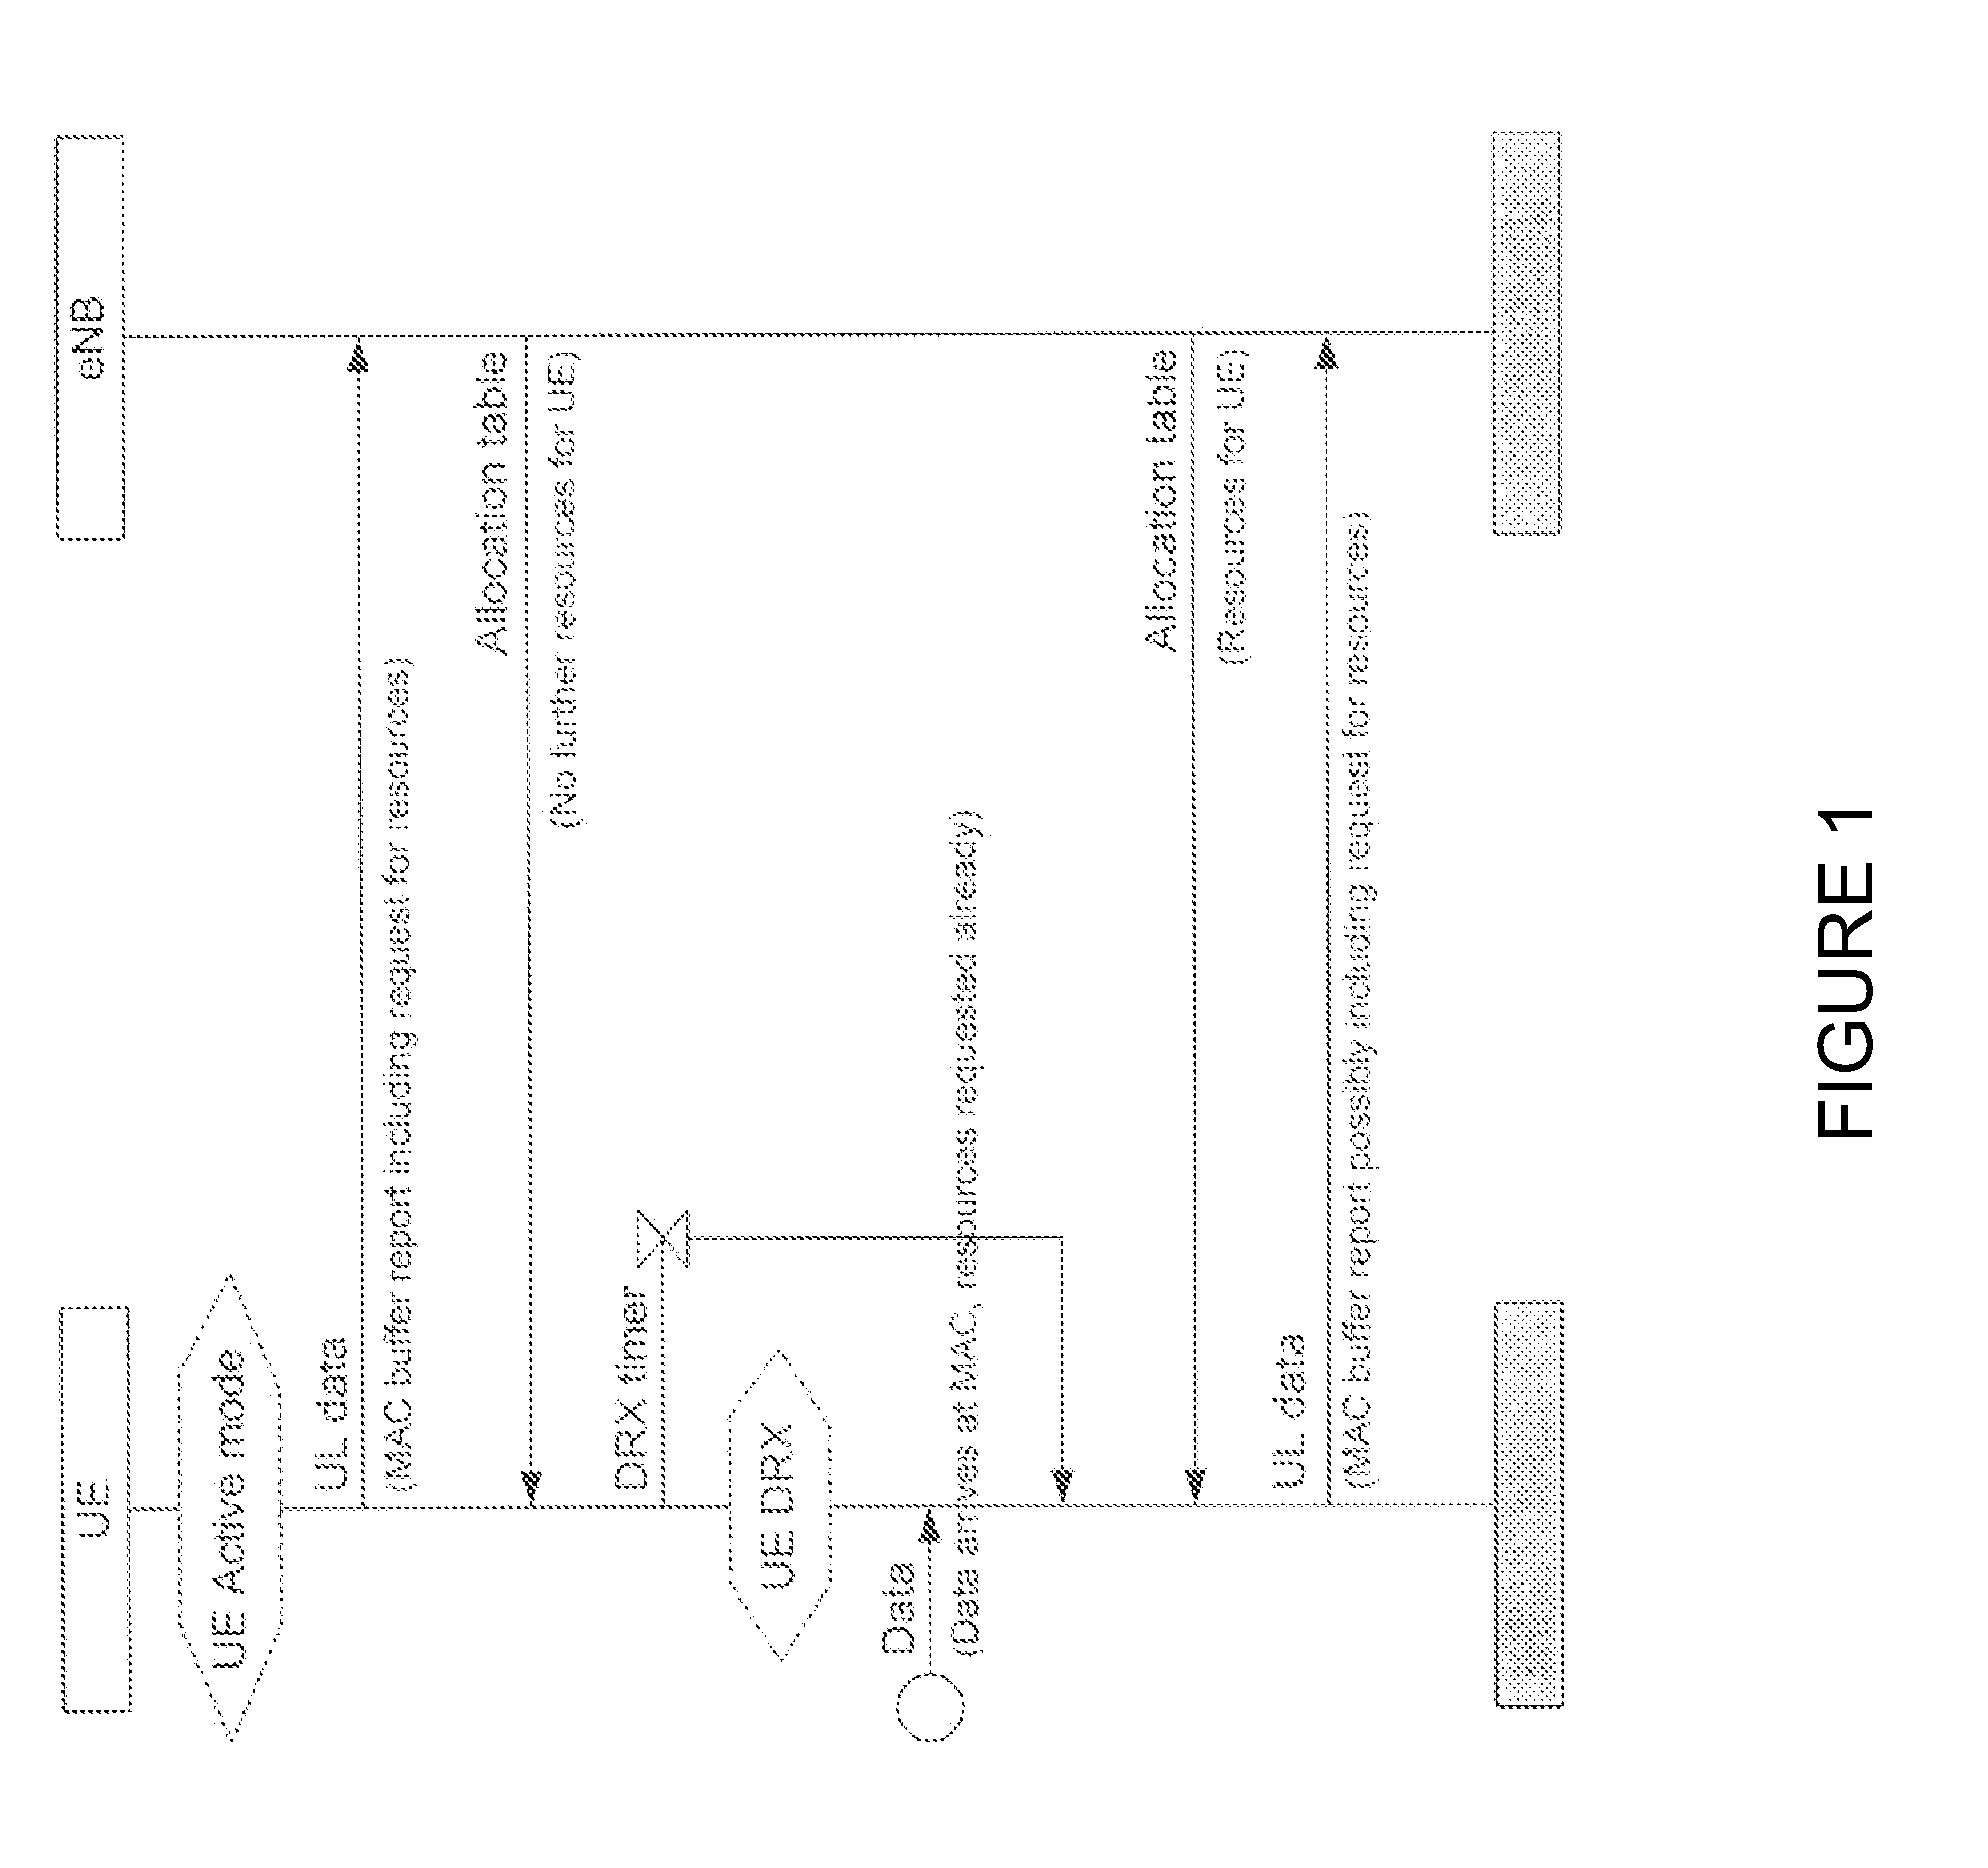 System and method for requesting uplink resources in a communication system